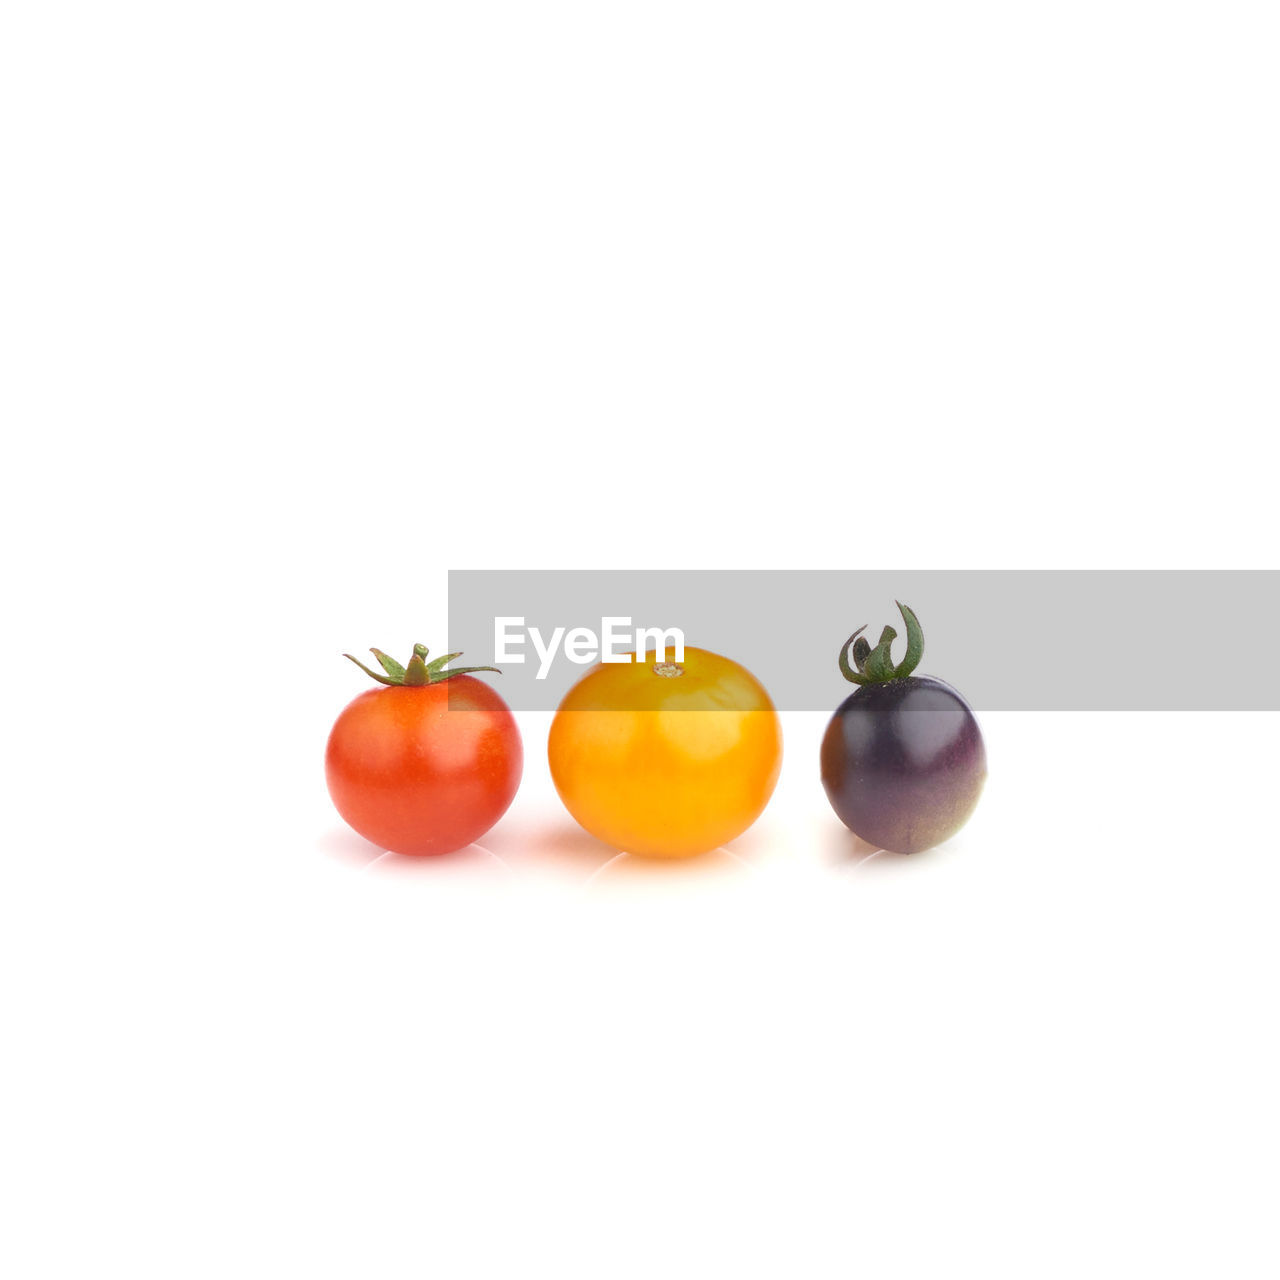 food, food and drink, healthy eating, fruit, wellbeing, freshness, produce, studio shot, tomato, copy space, indoors, vegetable, cut out, white background, jewellery, no people, plant, group of objects, still life, plum tomato, organic, cherry tomato, close-up, red